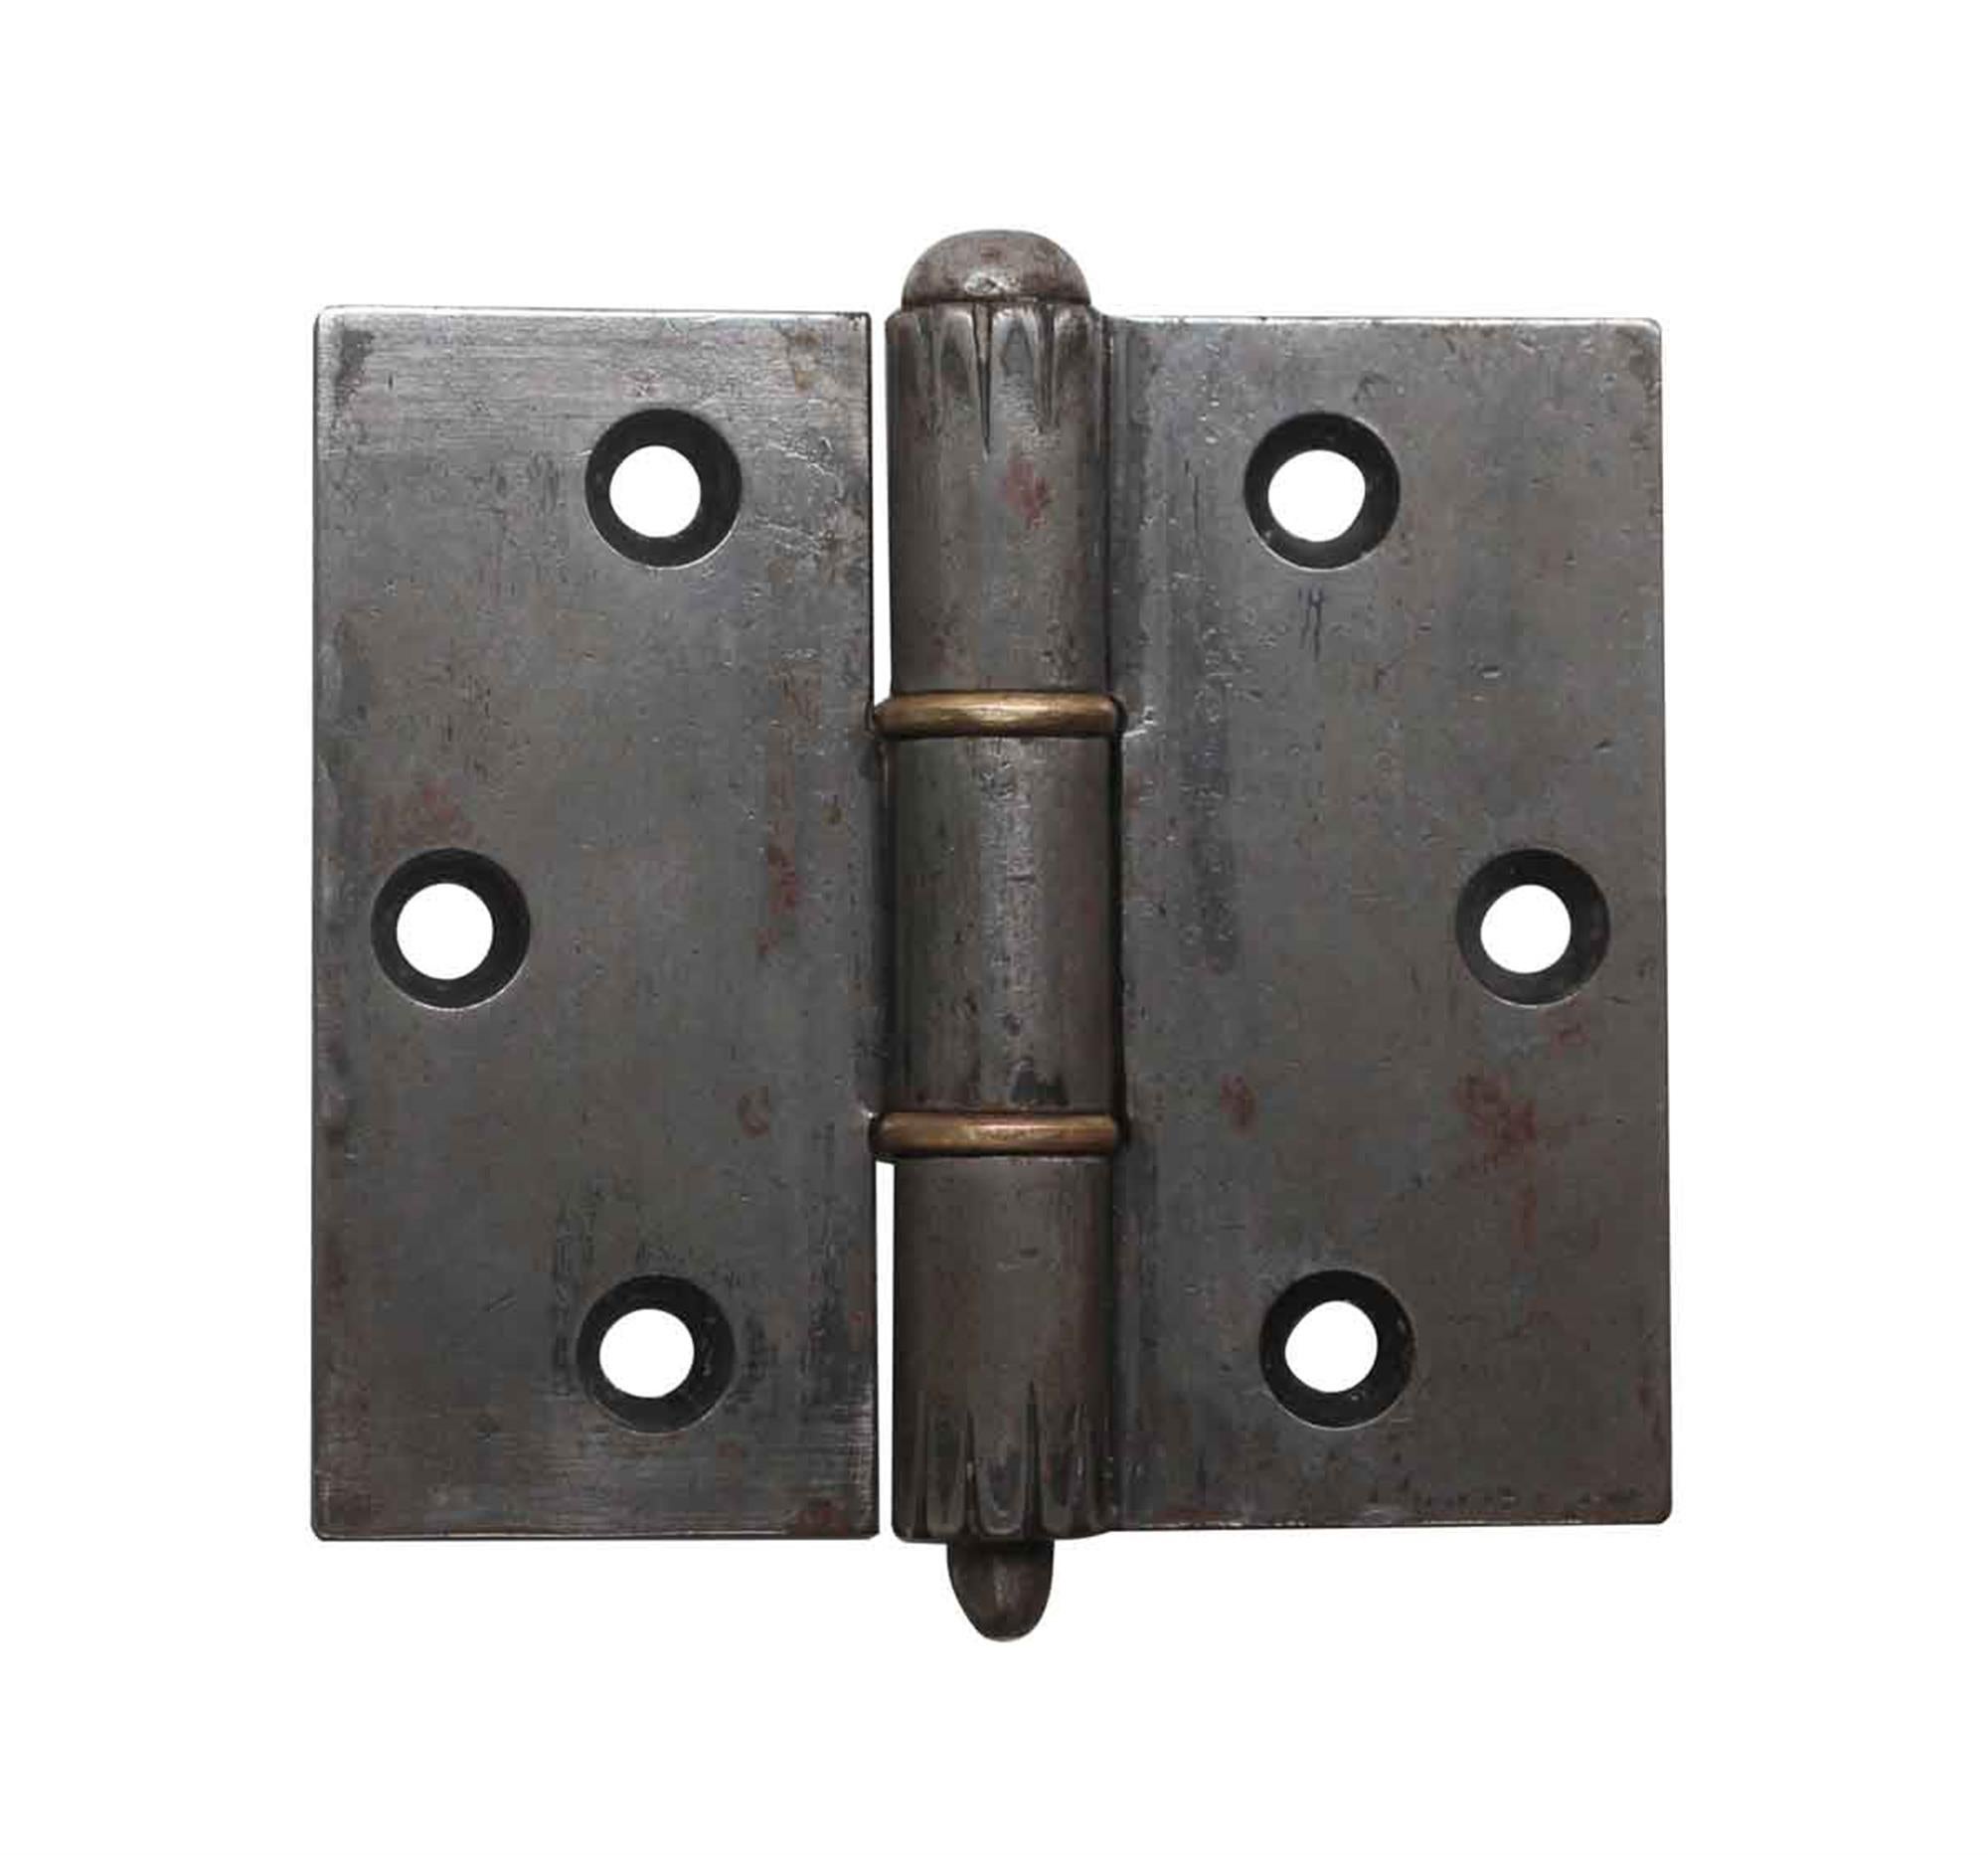 Arts & Crafts style original ornamental hand forged iron hinges attributed to Samuel Yellin, circa 1924. The door hinges were recovered from the La Tourelle Home in Fox Chapel, PA. The Norman French Manor style house was built by the renowned